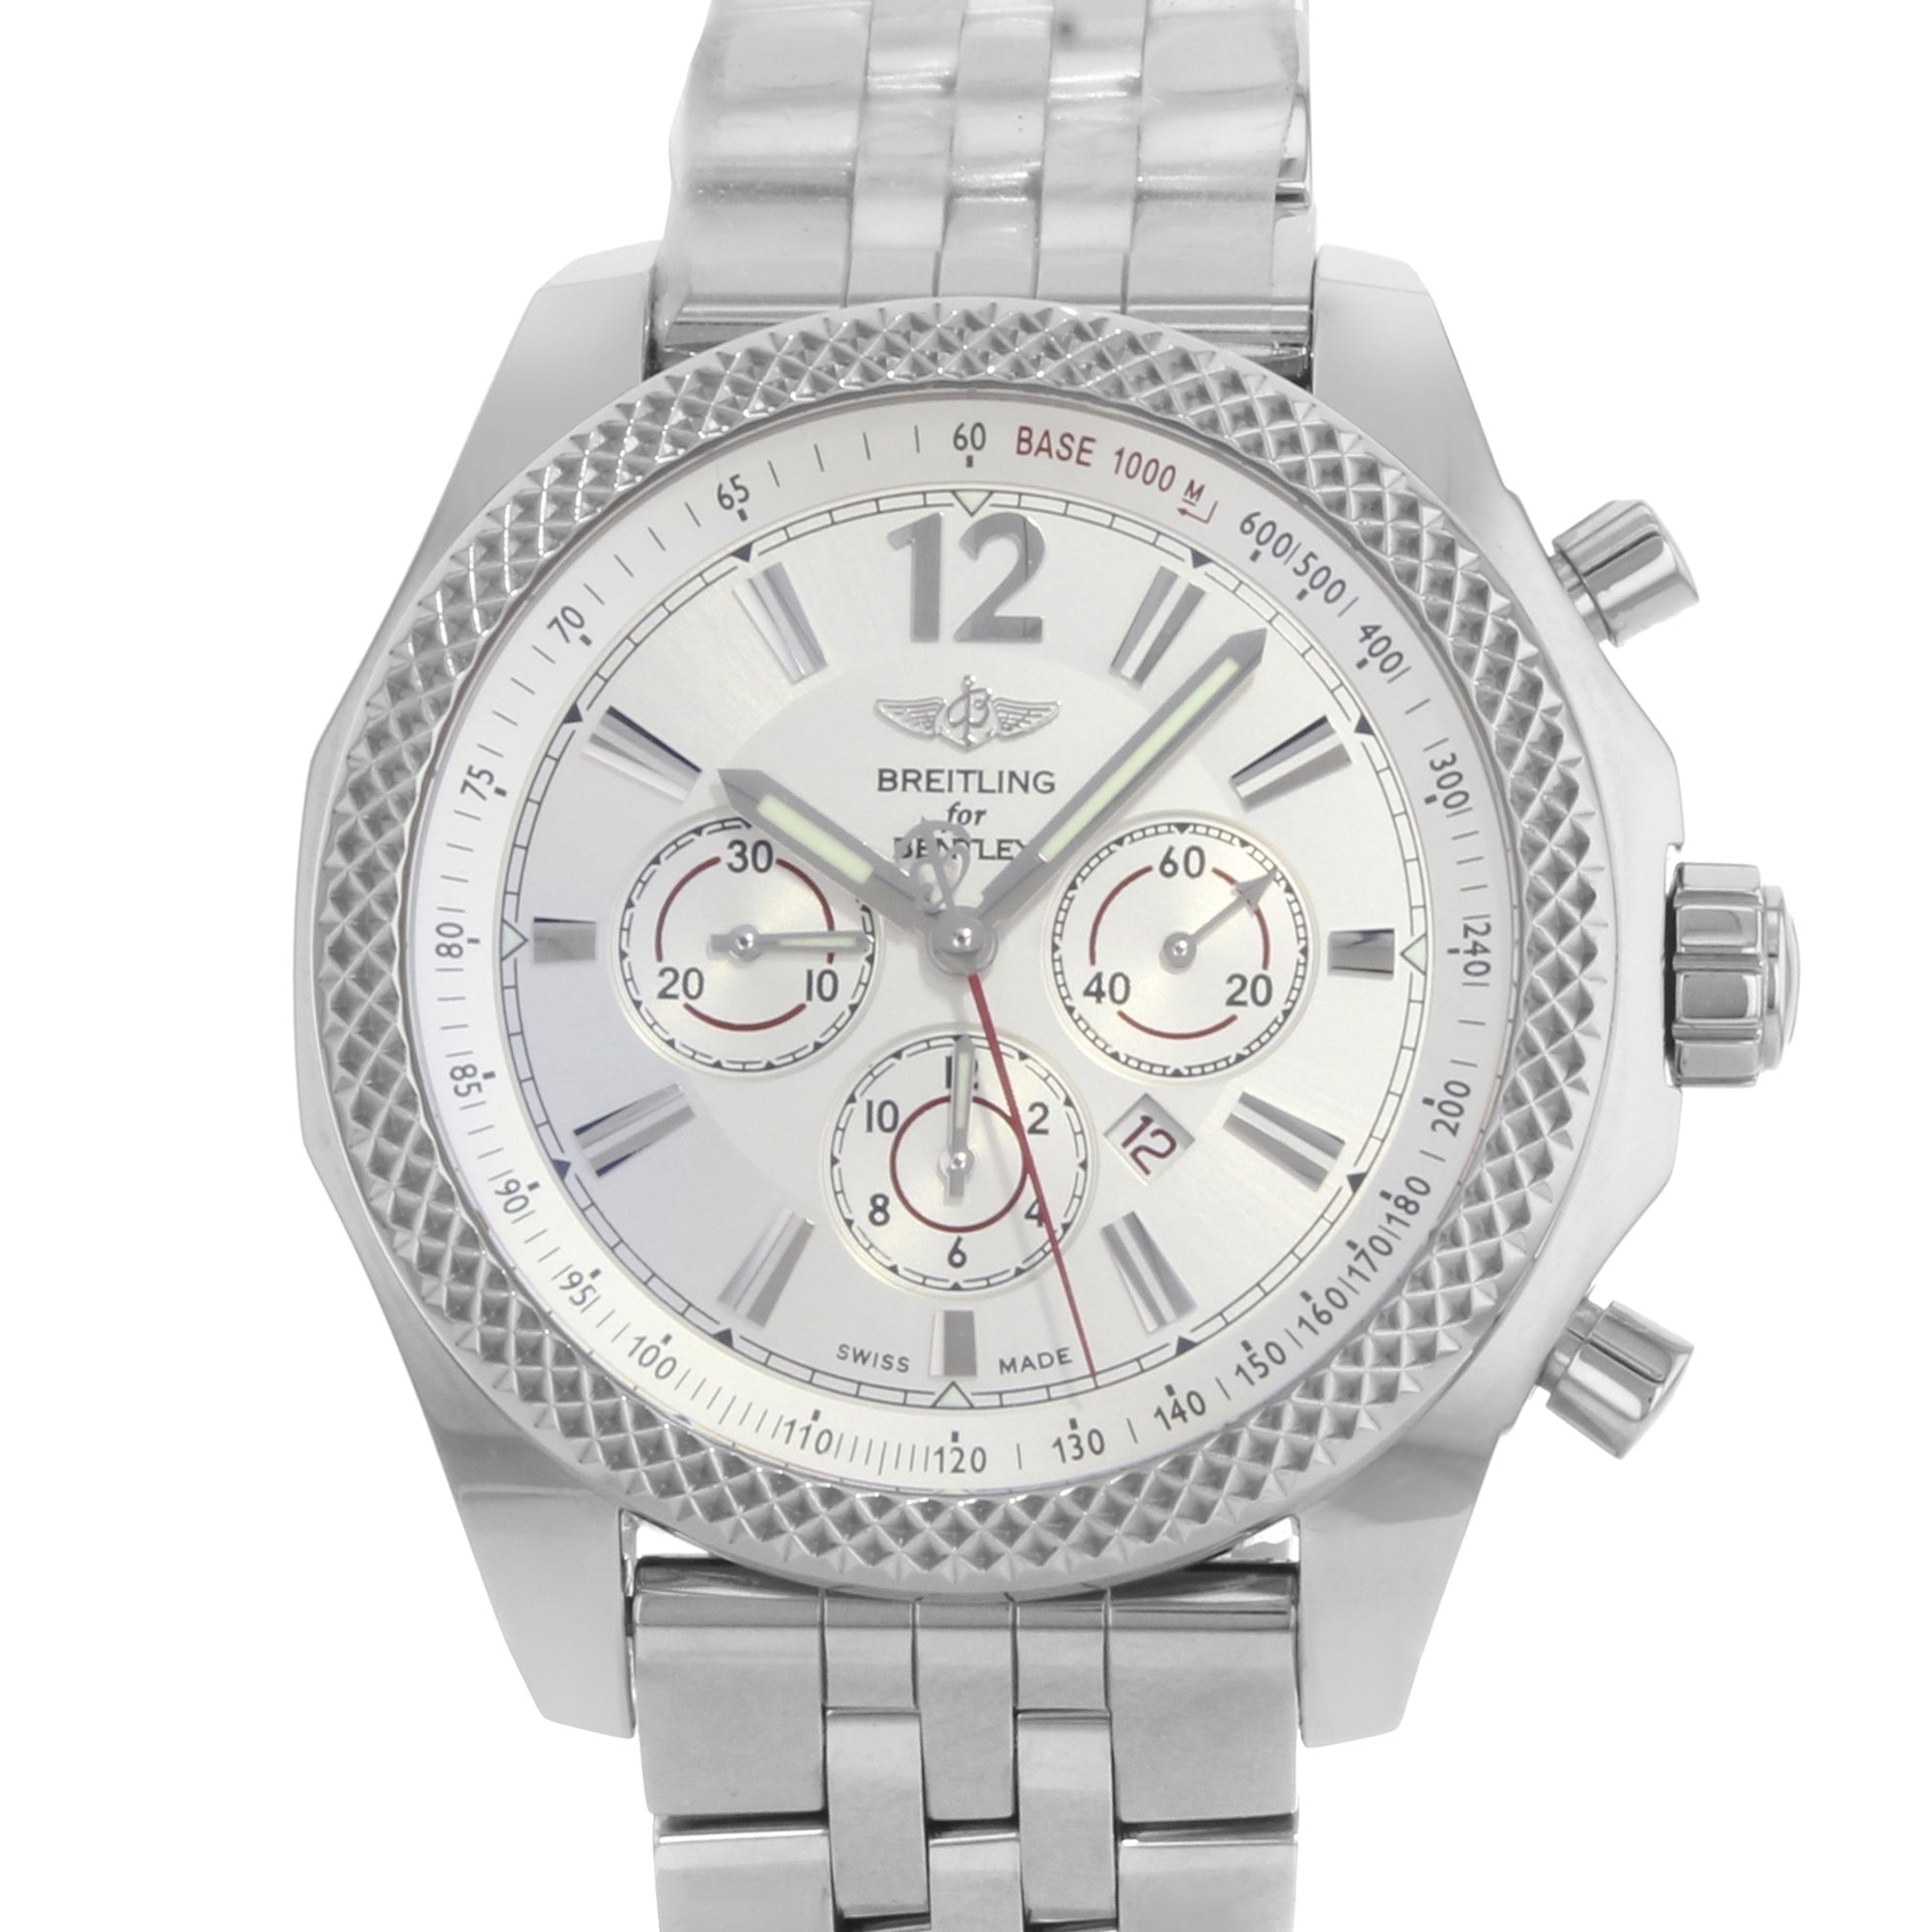 Breitling Breitling For Bentley Automatic Chronograph Silver Dial Men's Watch A4139021-G754-984A